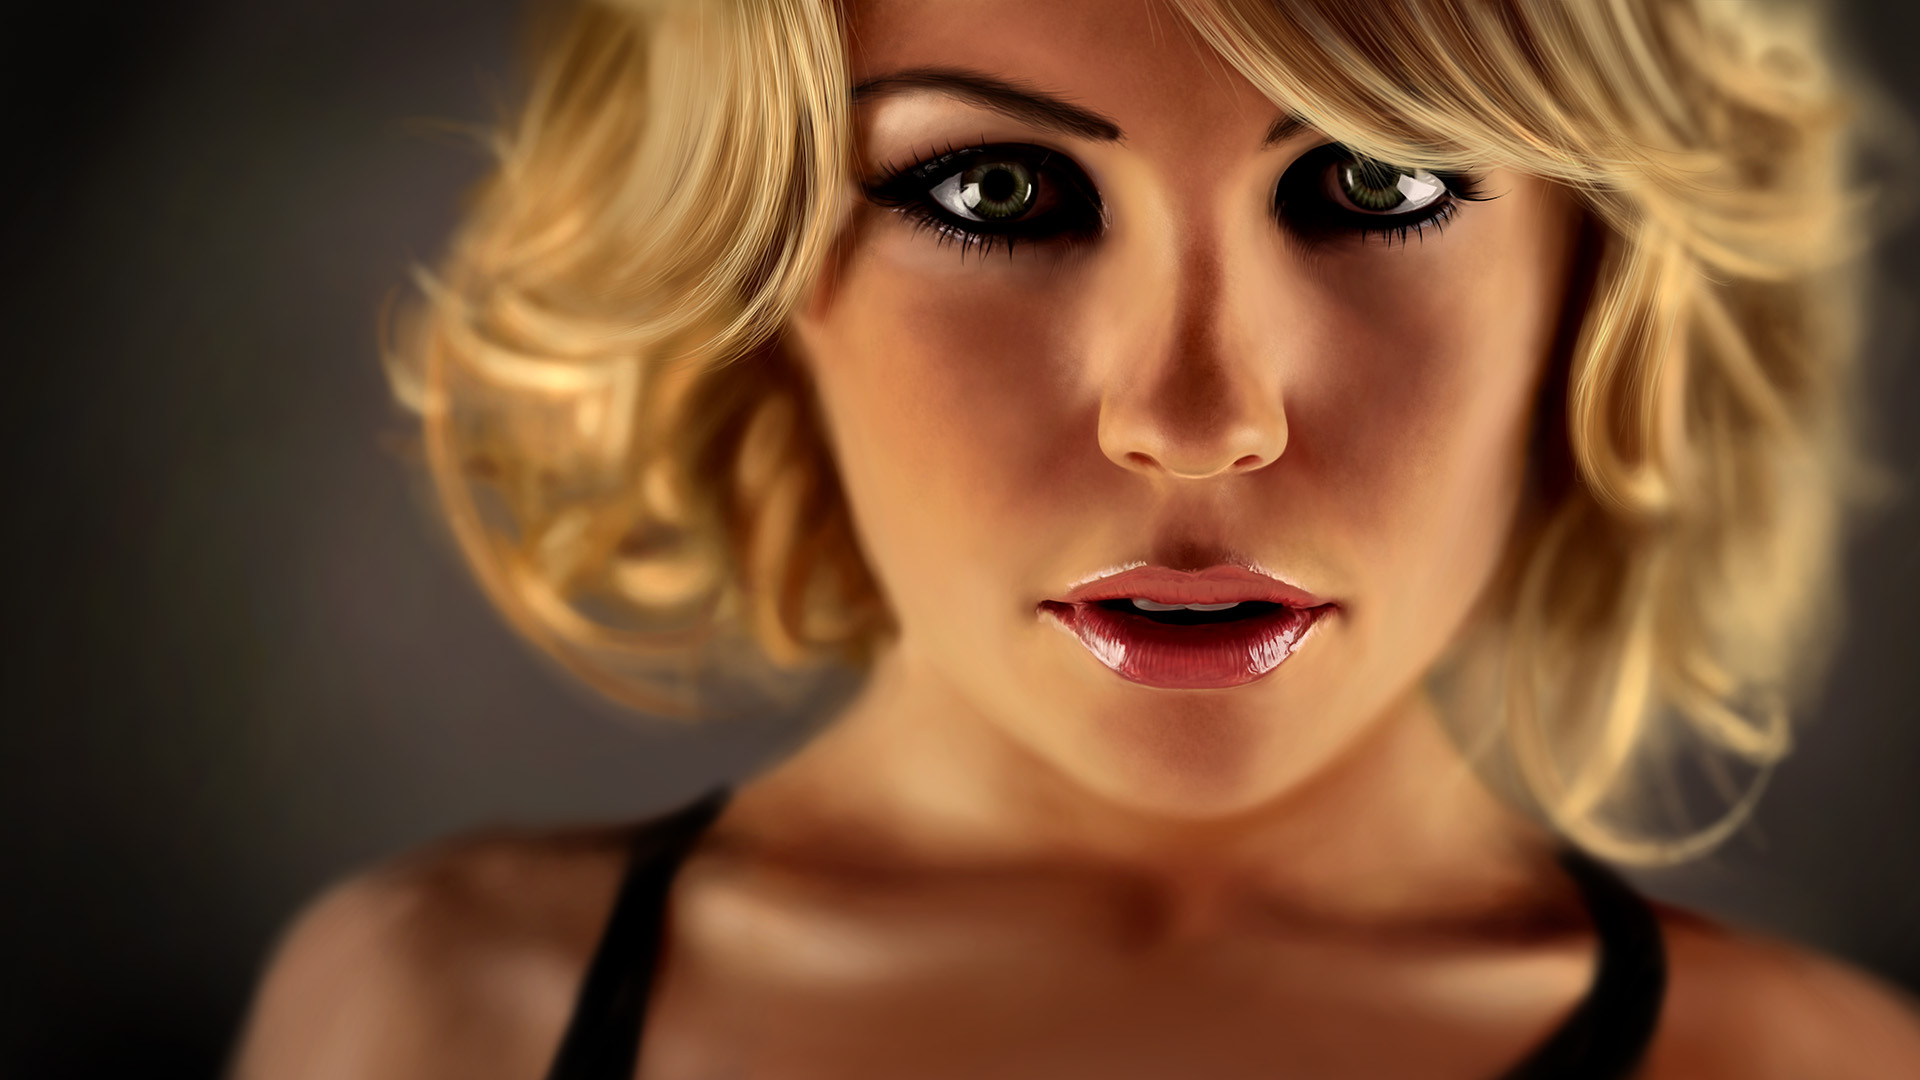 Abbey Clancy Painting in Photoshop